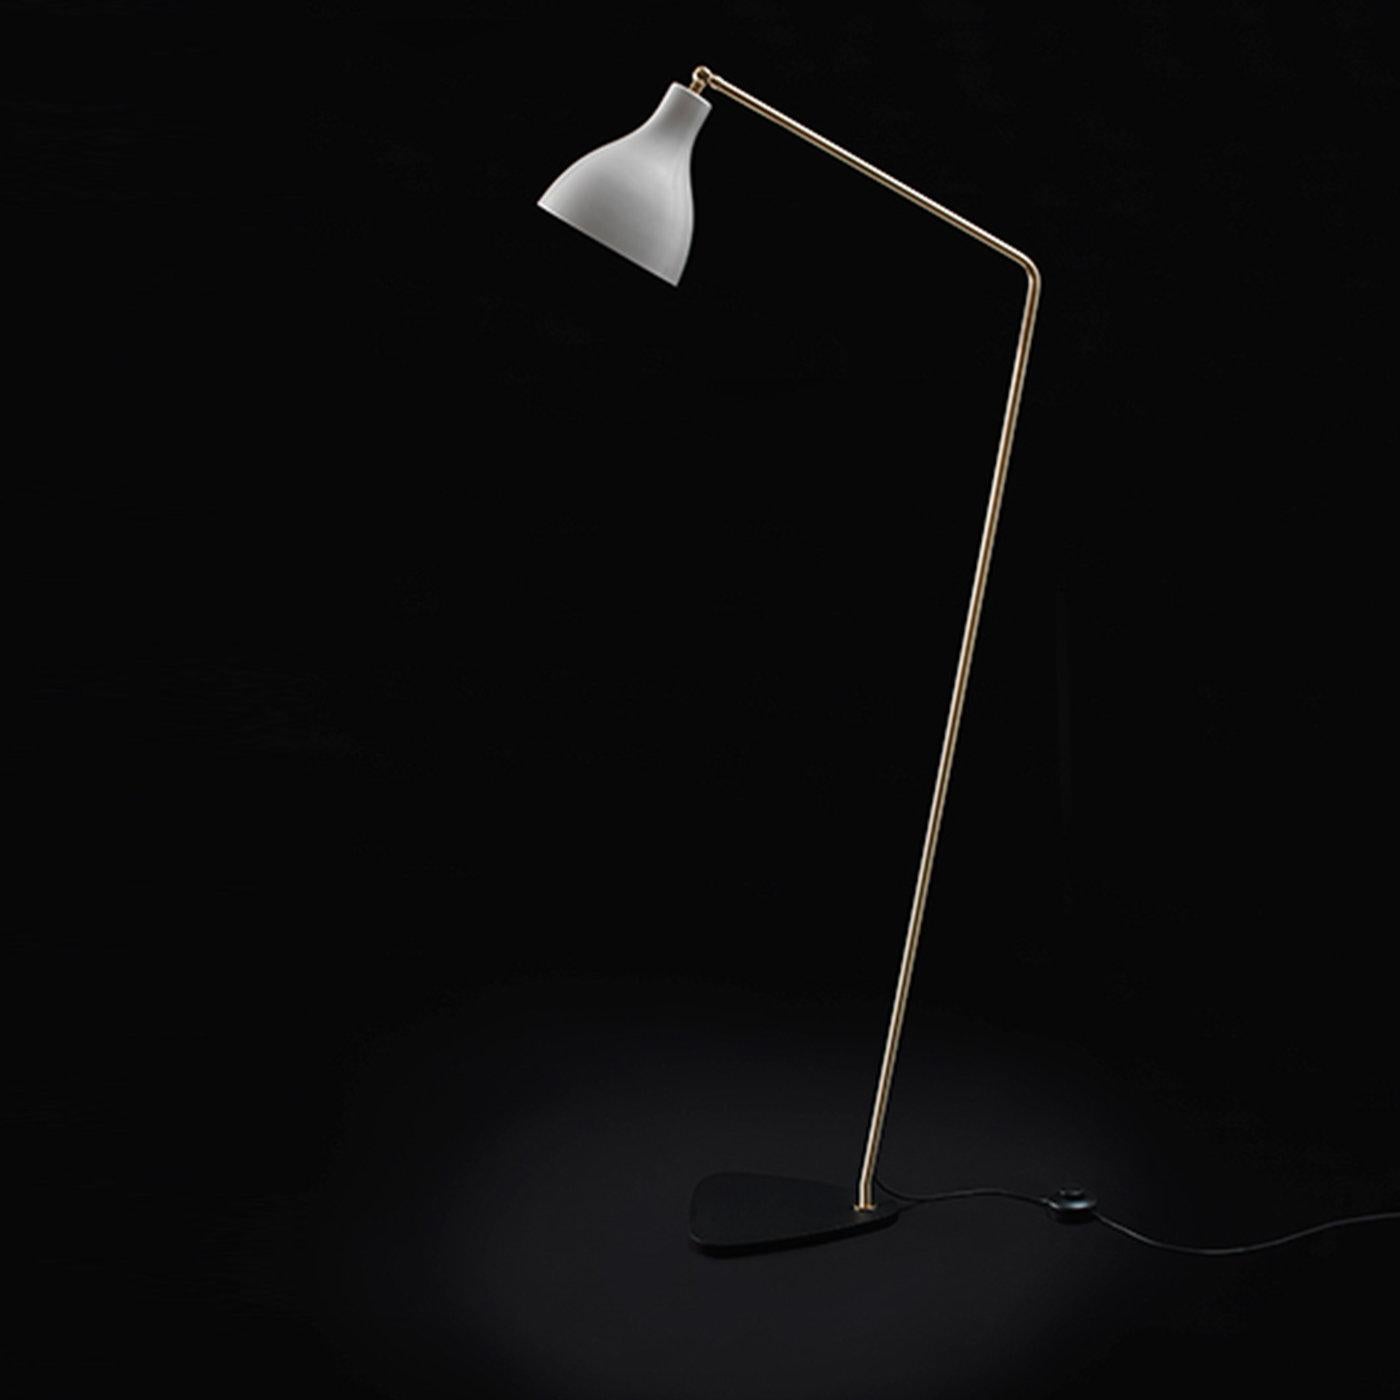 Elegant and slender slanted floor lamp with brass body painted aluminum shade, and iron base. Can also be ordered in the following combinations: brass/shiny white, brass/texturized black, chrome/texturized black.